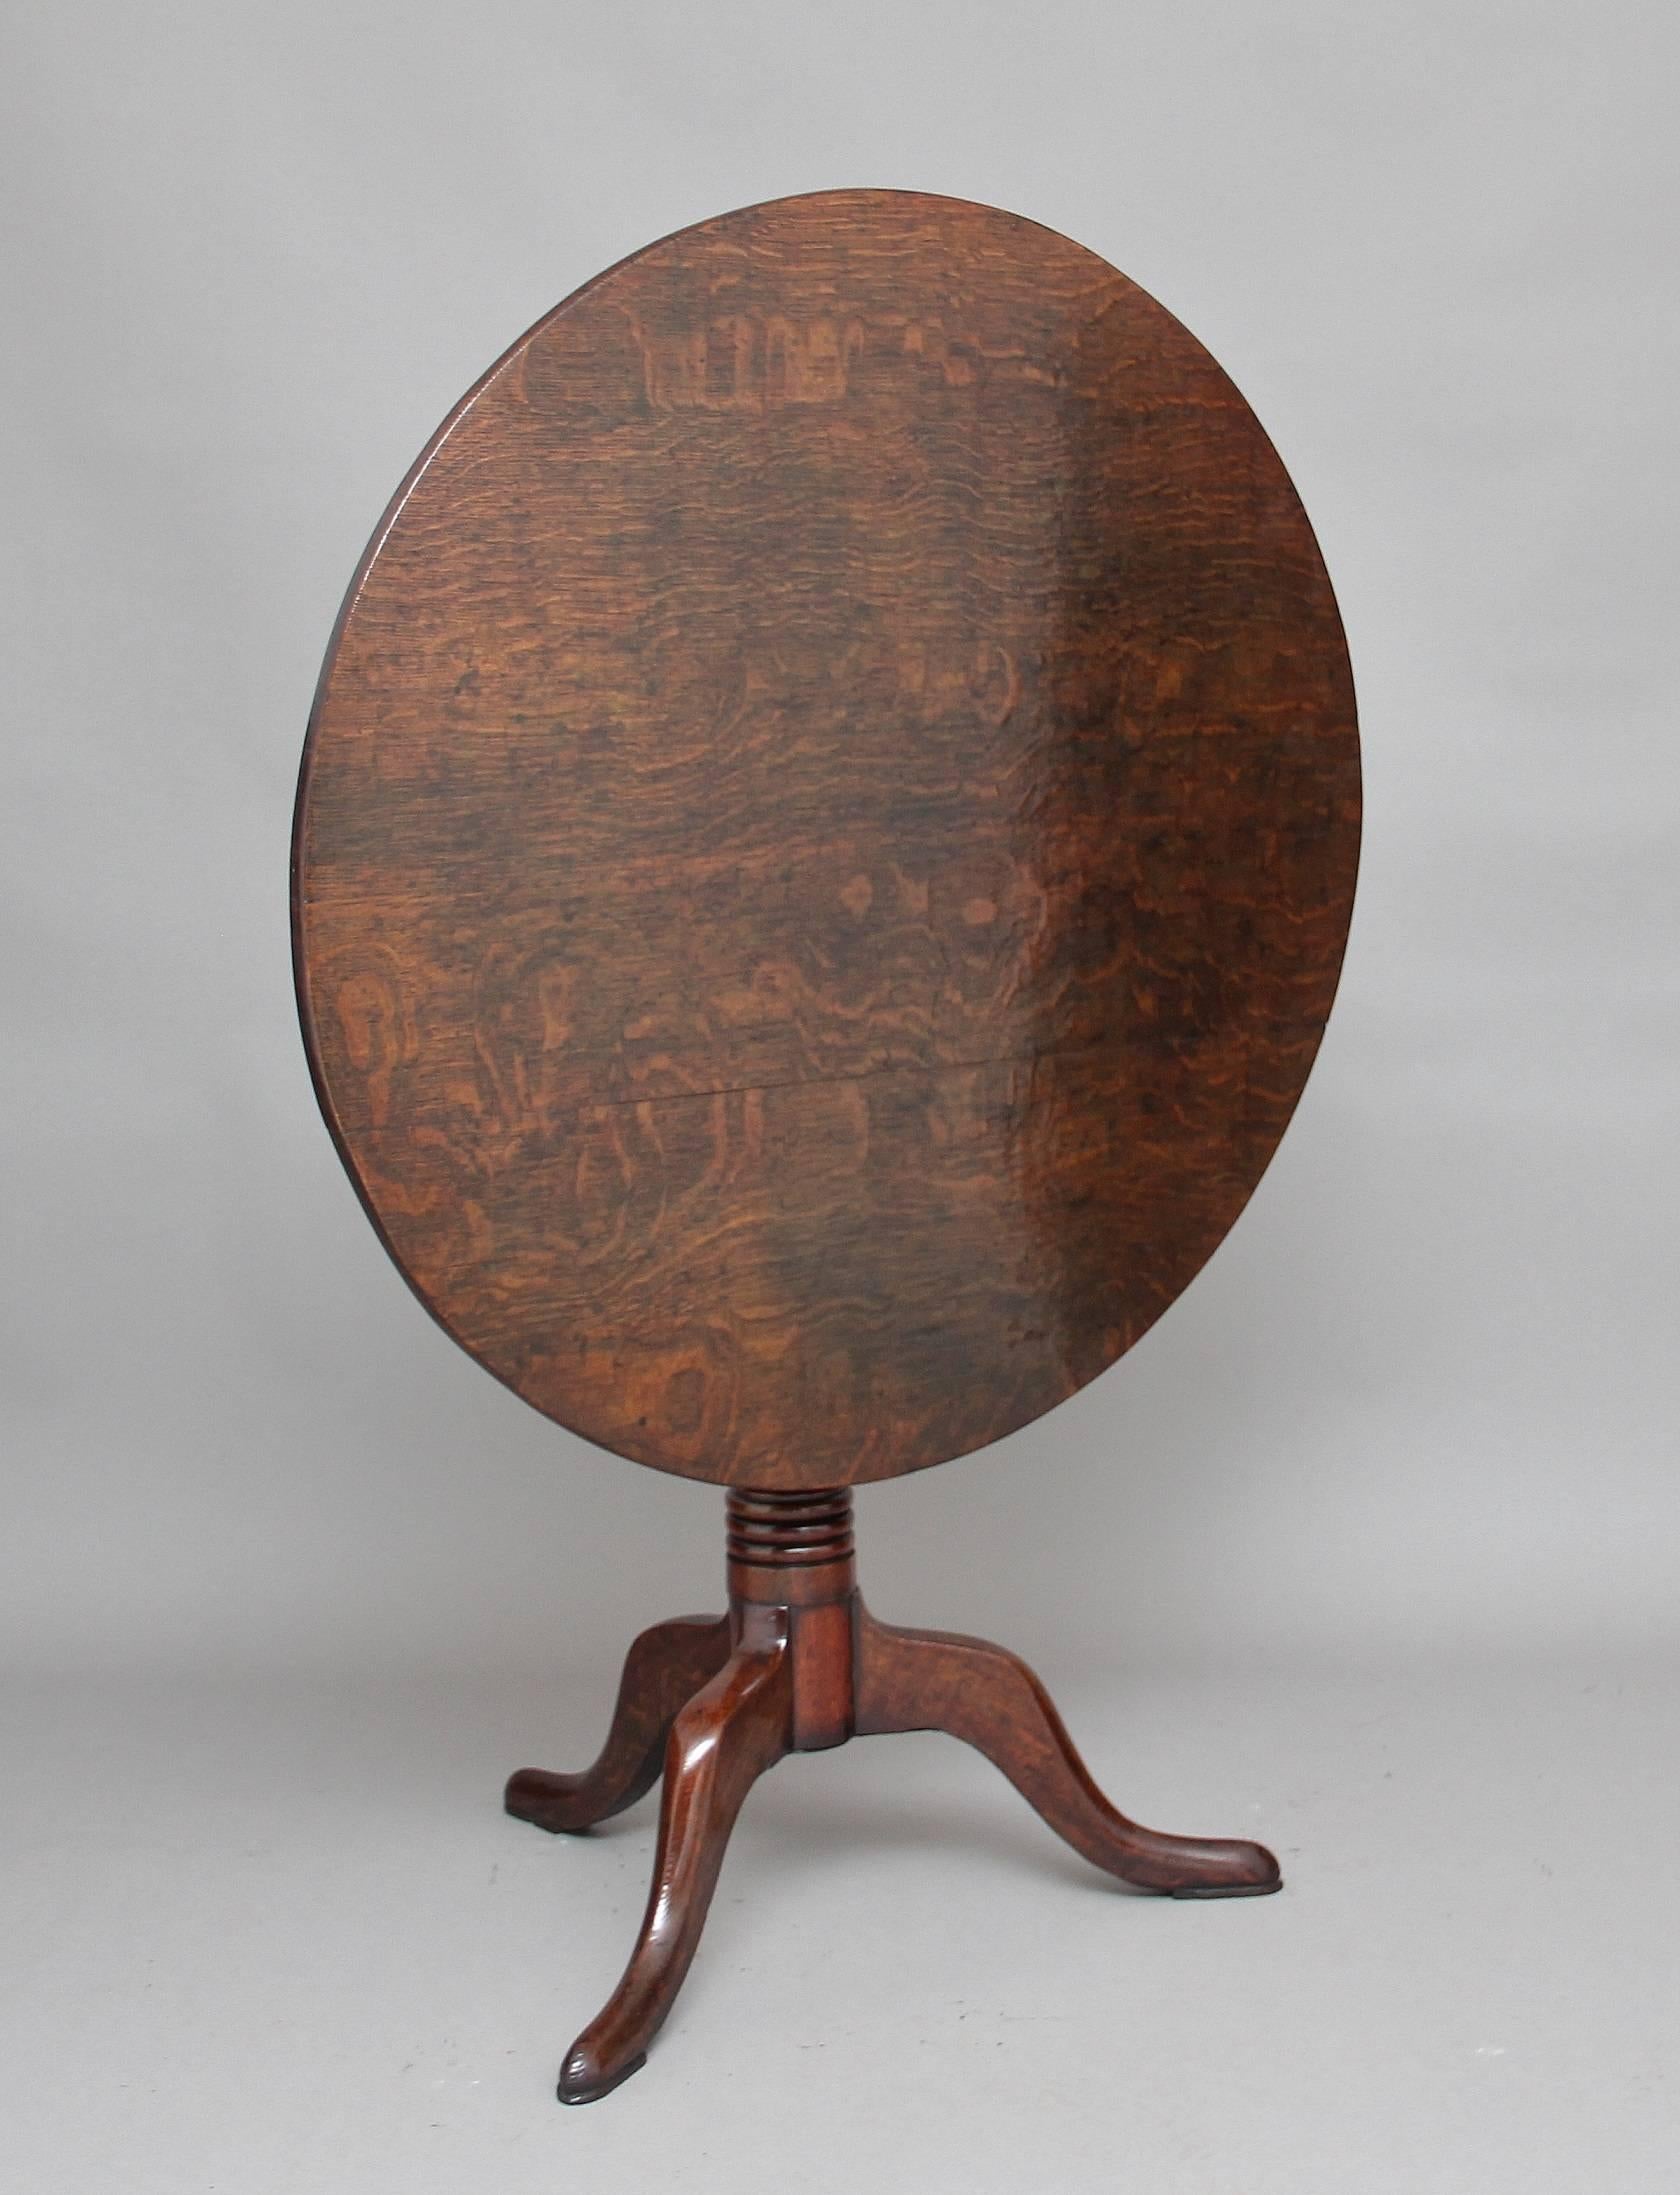 18th century oak tripod table, the circular tilt-top supported on a lovely turned column with three slender cabriole legs. Lovely patina. circa 1790.